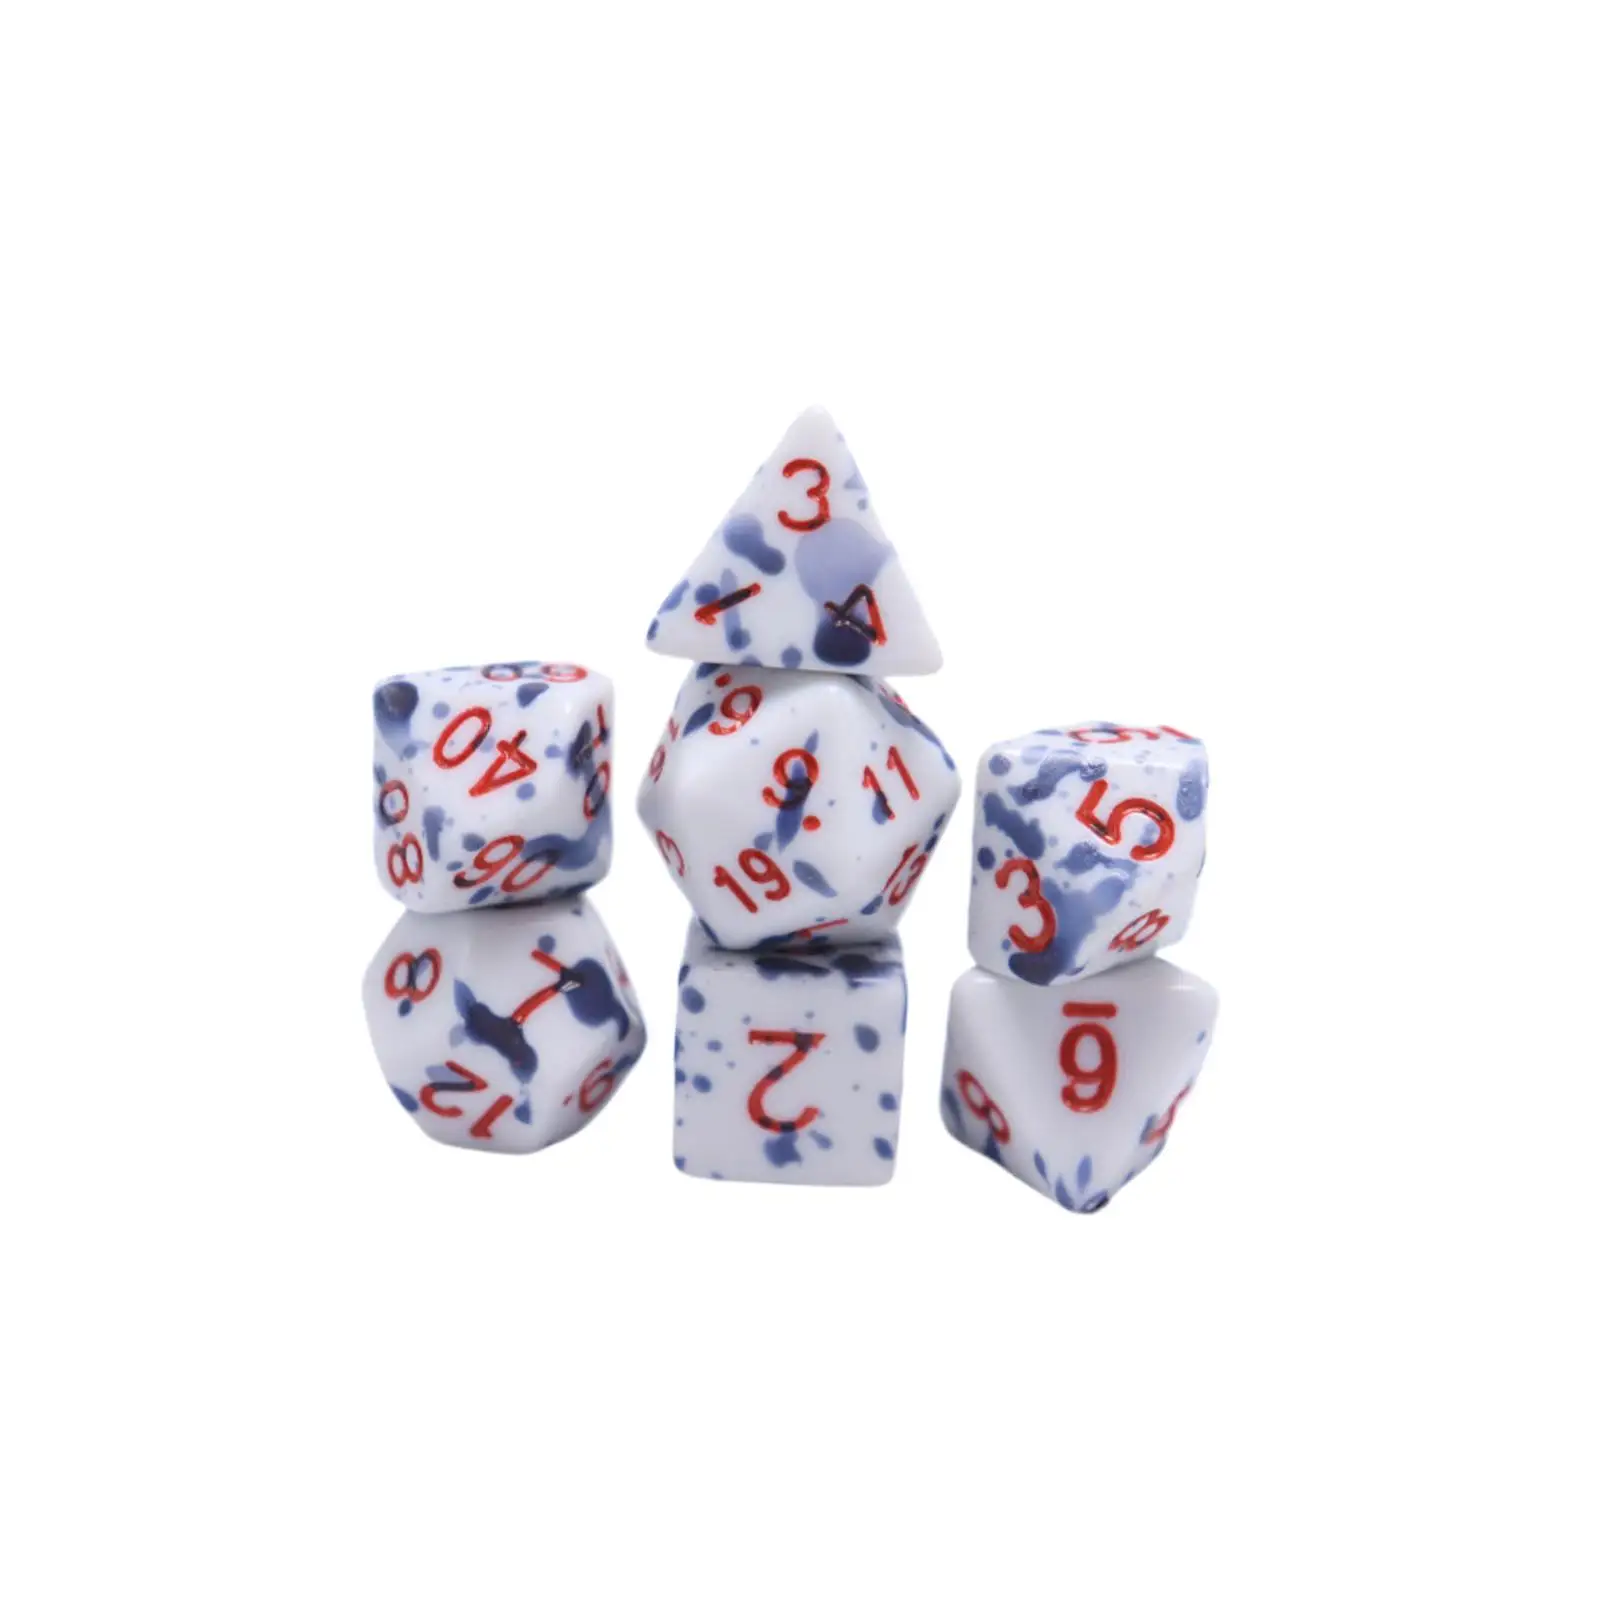 7Pcs Multisided Dice Handmade Polyhedral Dice for Family Gatherings Role Playing Game Tabletop Game Gifts Party Accessories